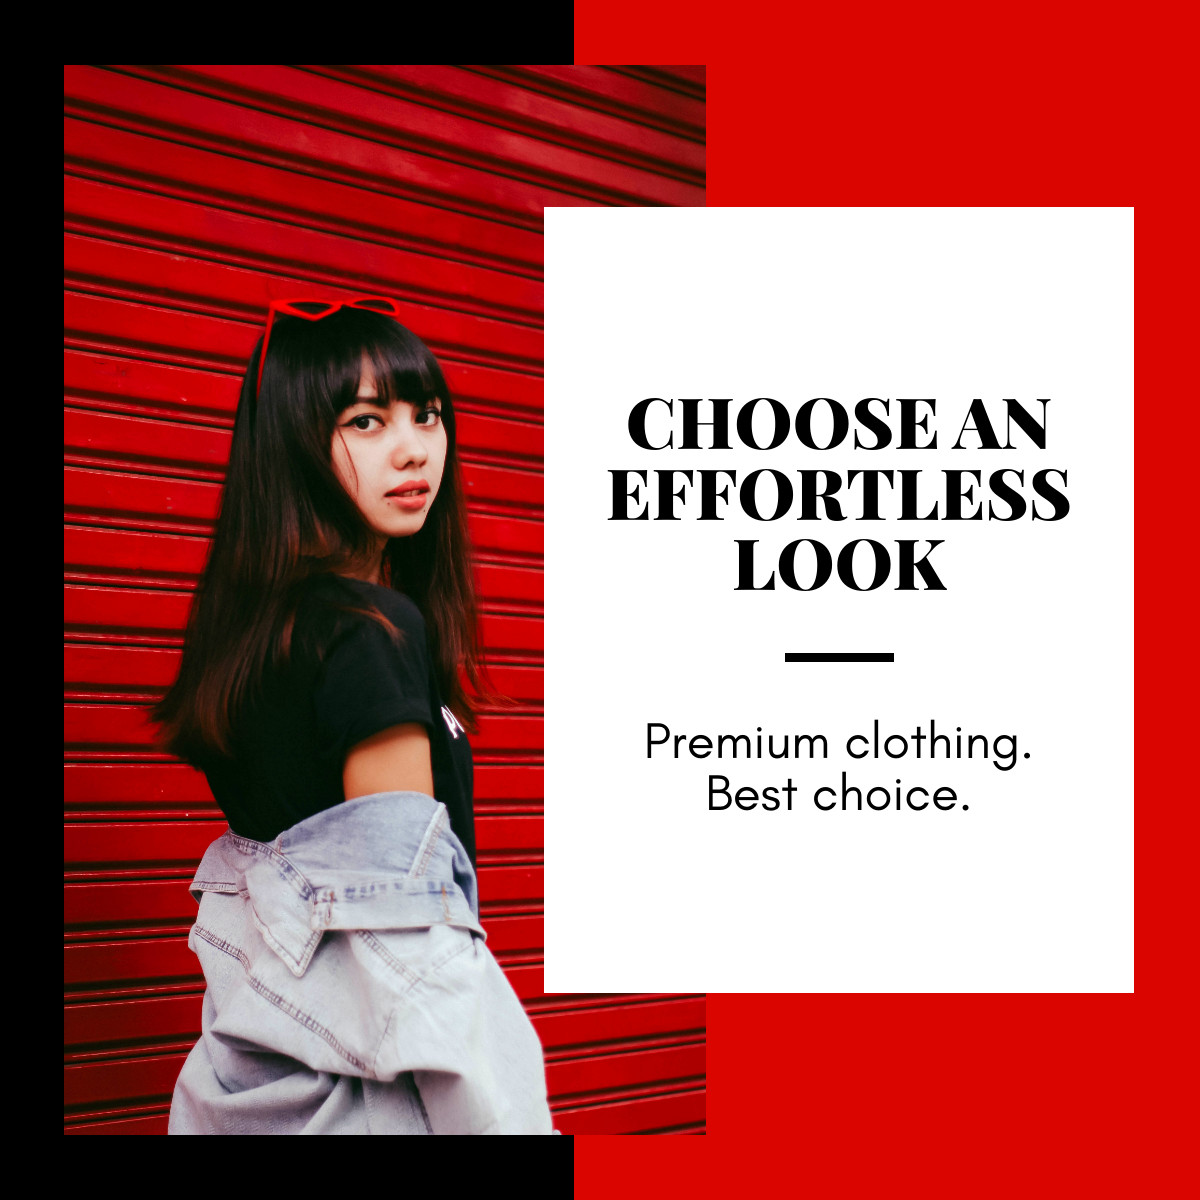 Effortless Look with Premium Clothing